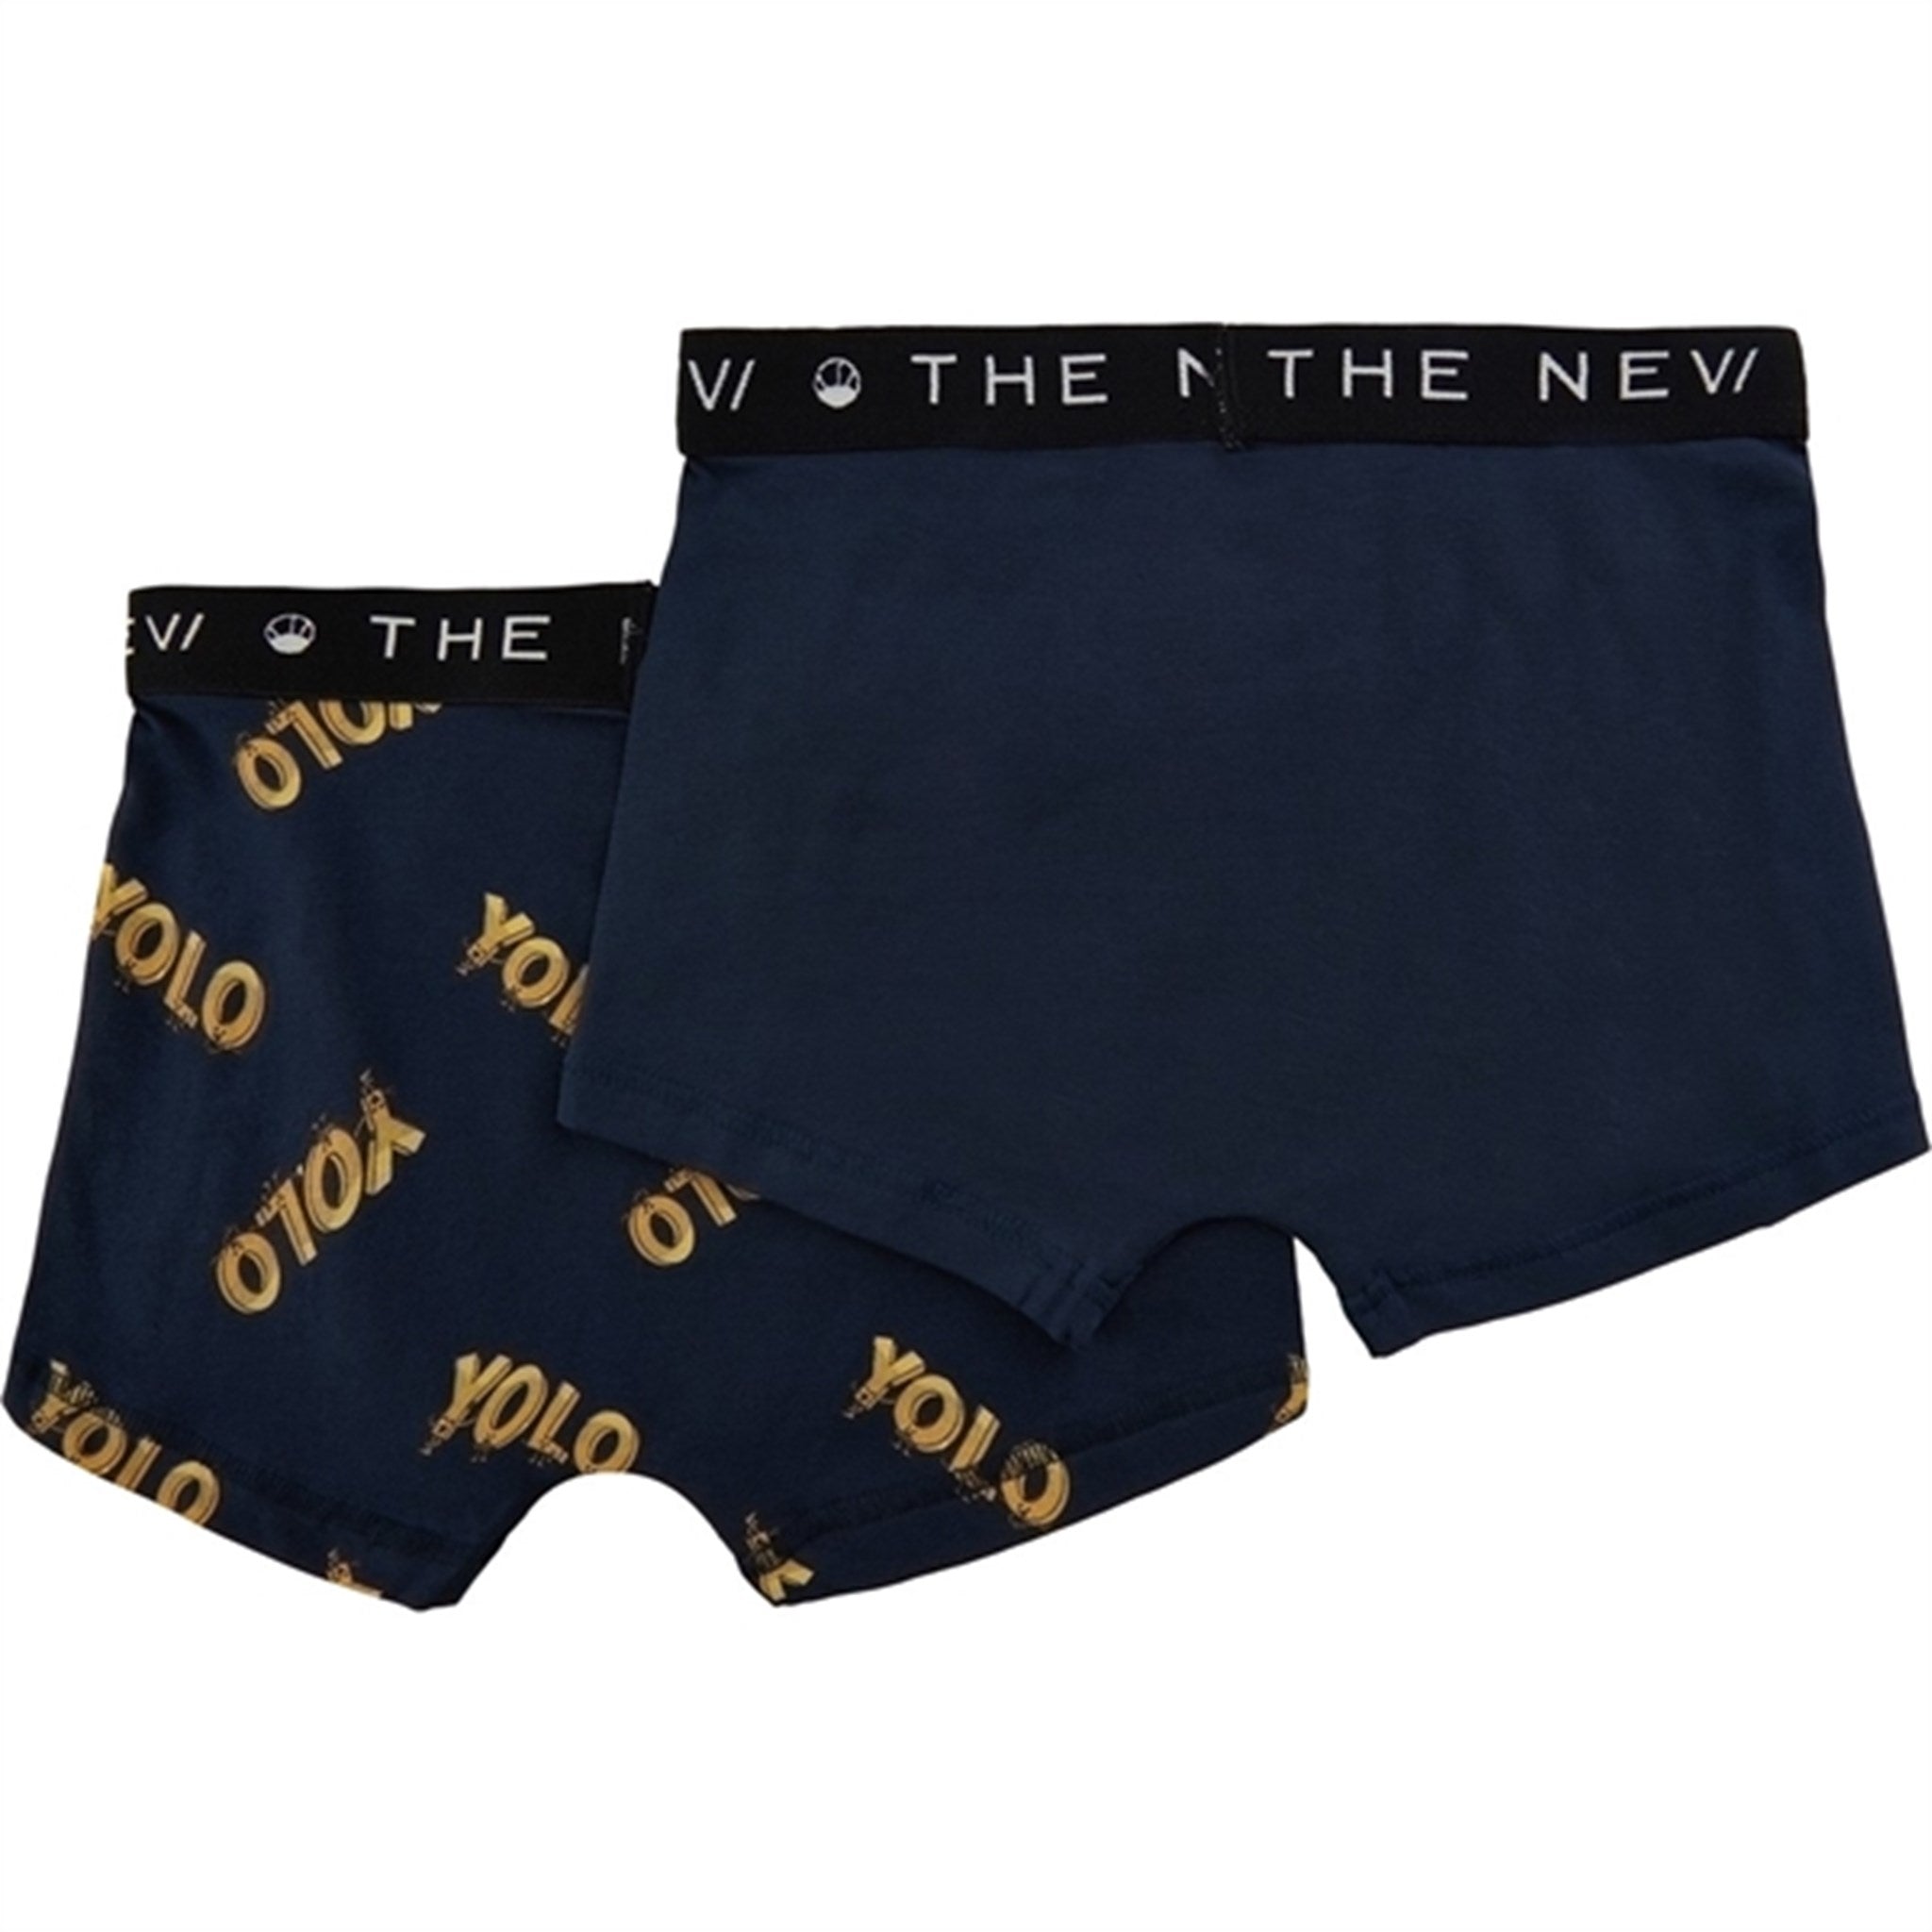 THE NEW Navy Blazer Boxers 2-pack 2